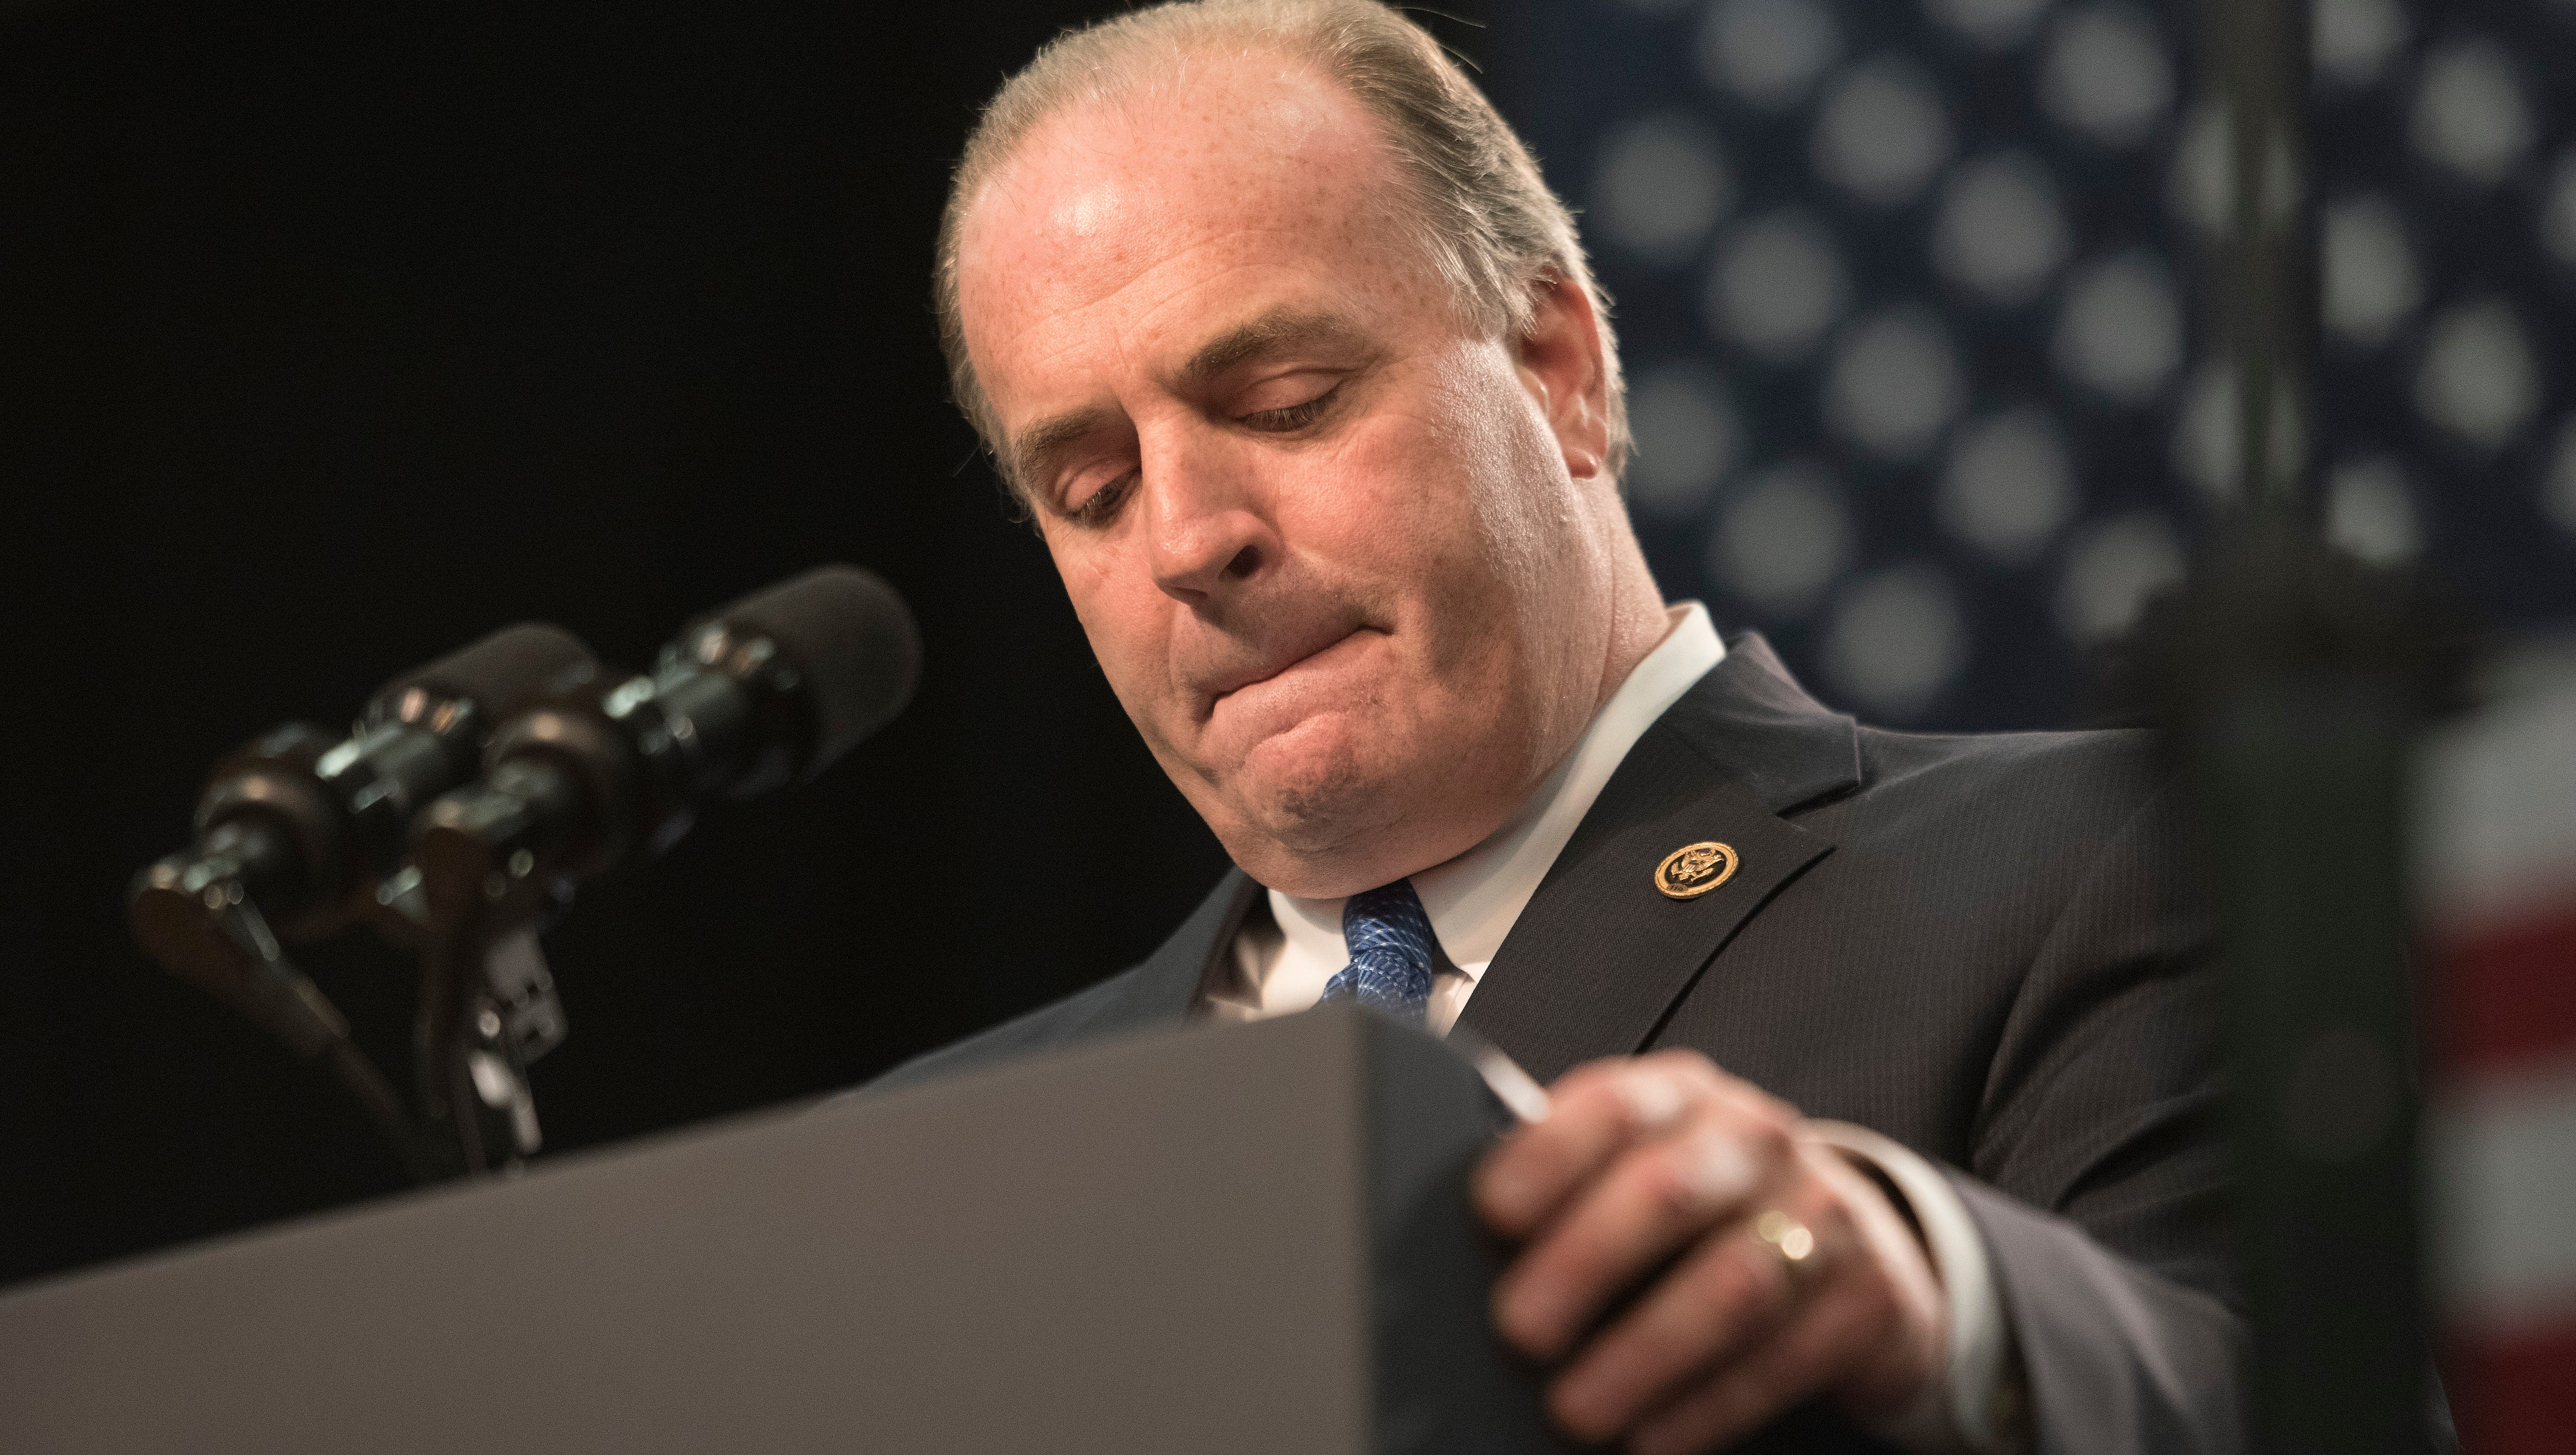 Flint resident Dan Kildee, United States Representative for Michigan's 5th District, takes a moment during his speech  at Northwestern High School in Flint.